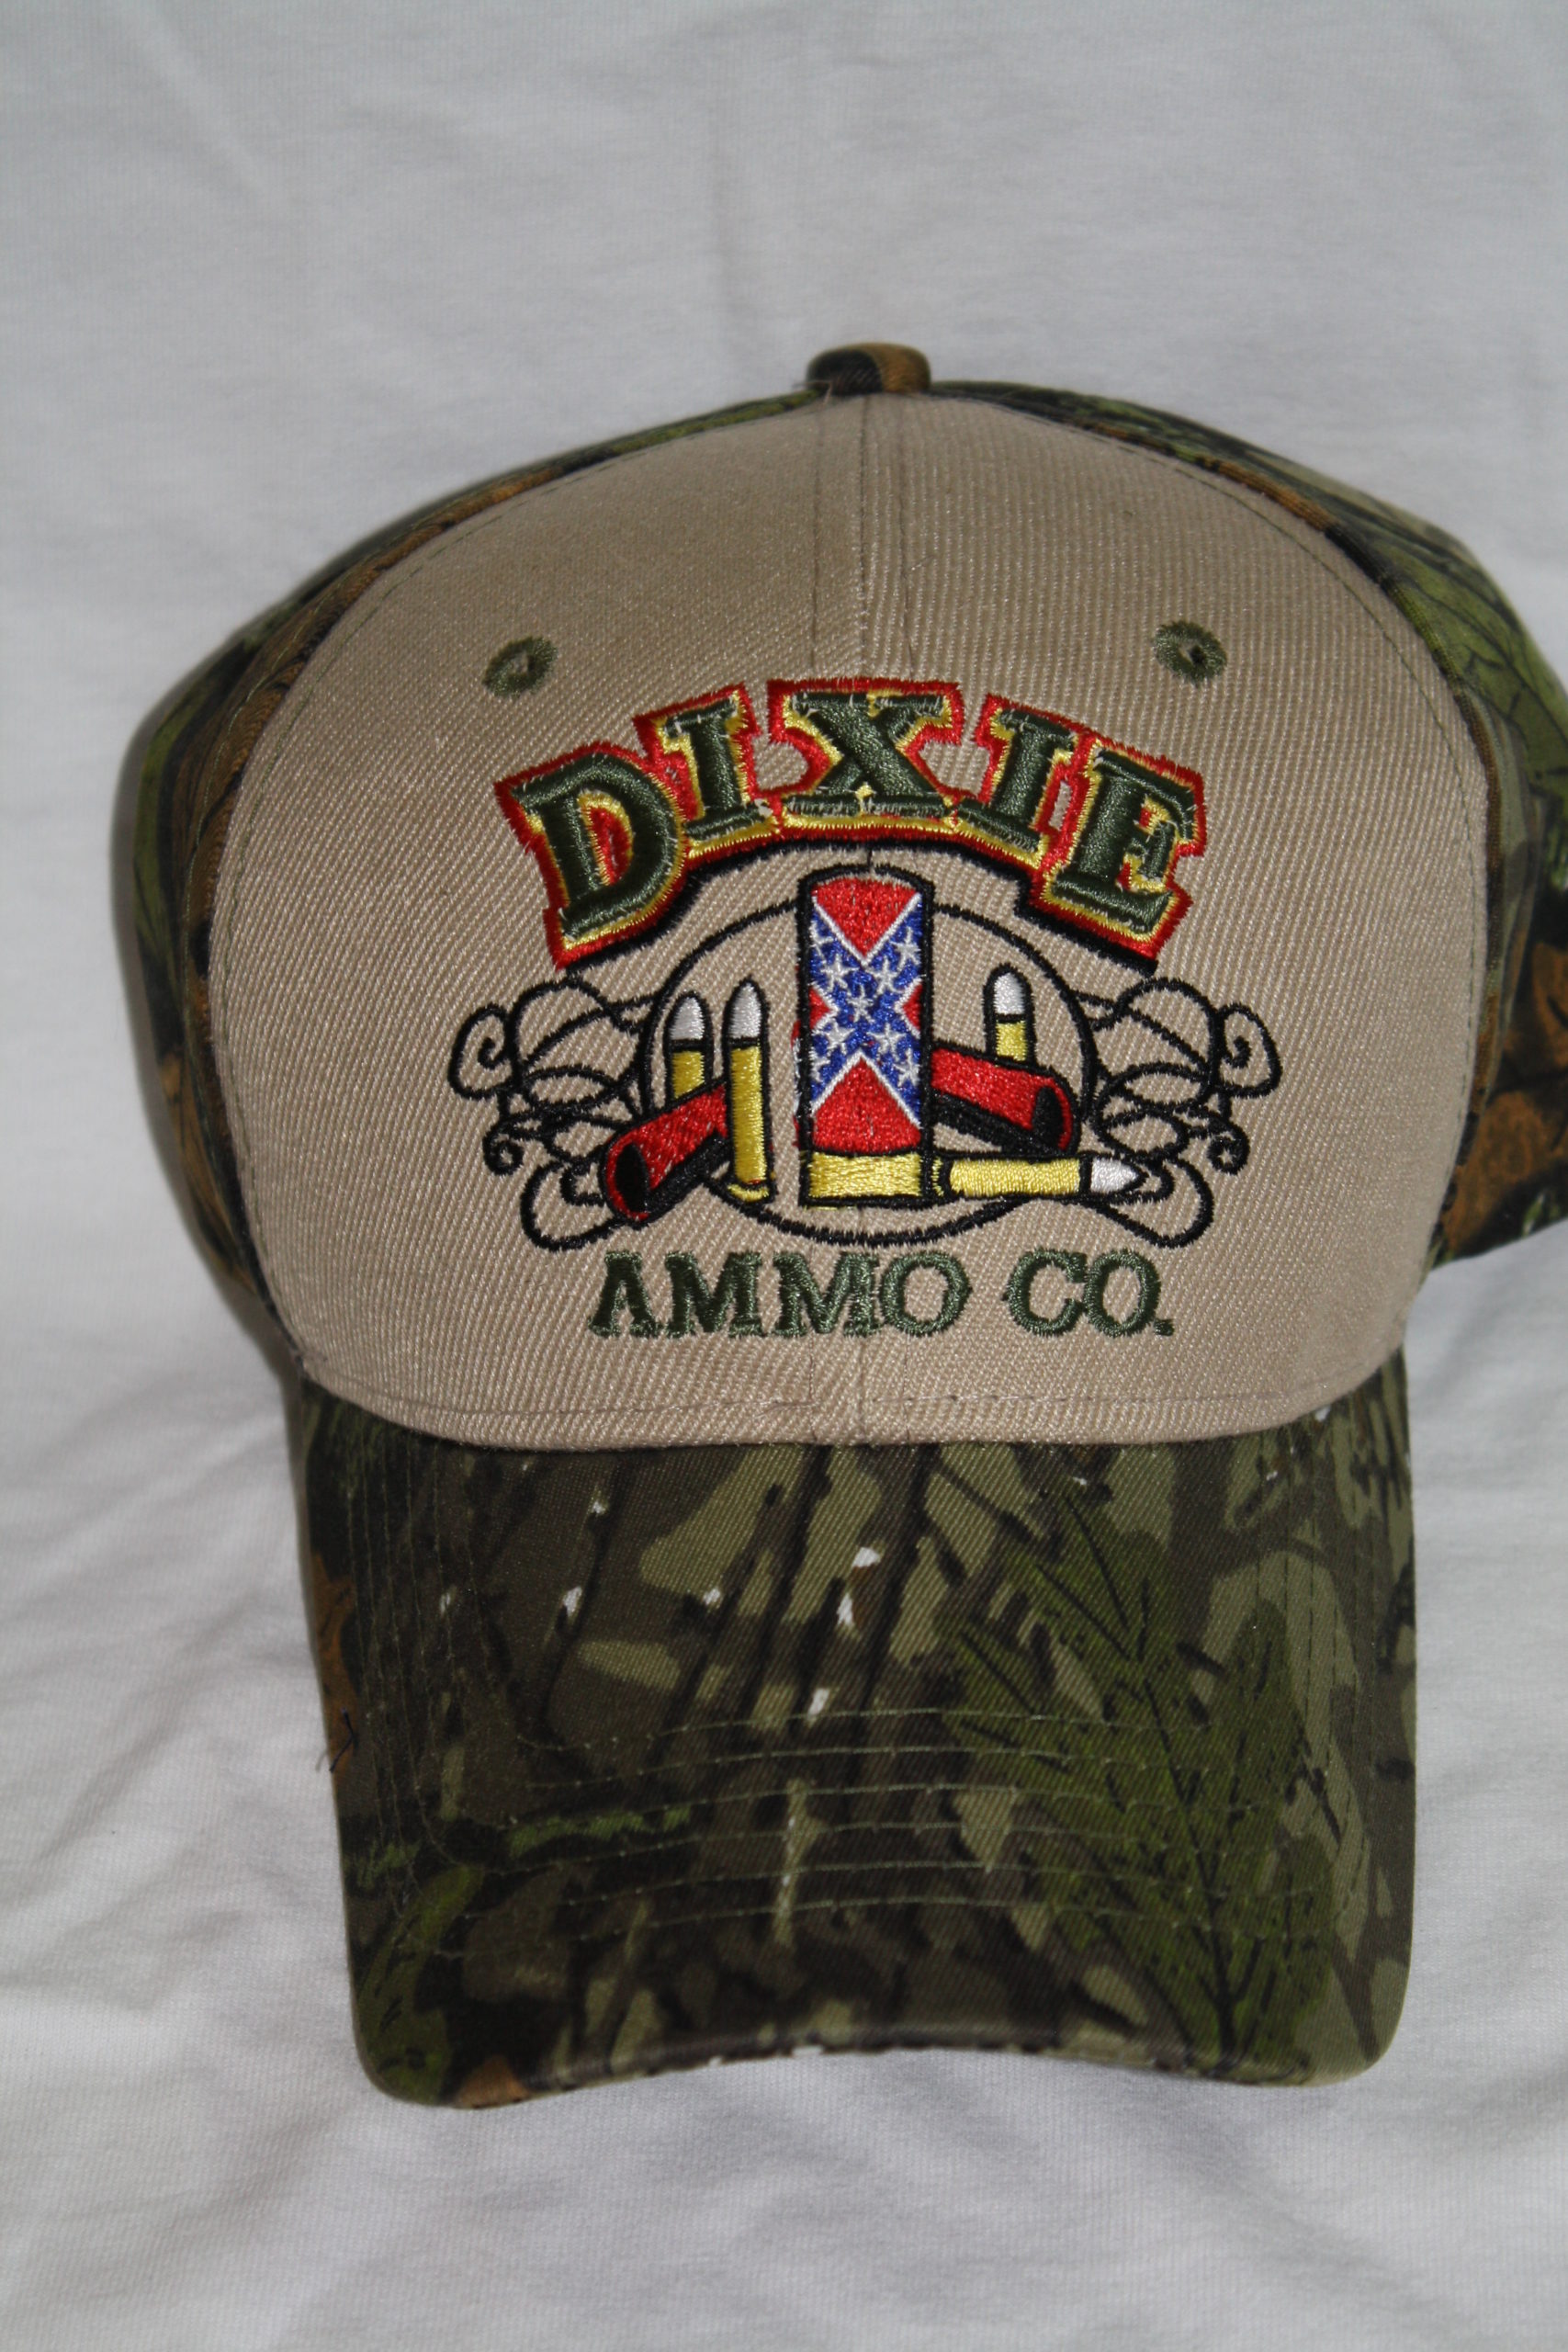 Dixie Ammo Co. Hat